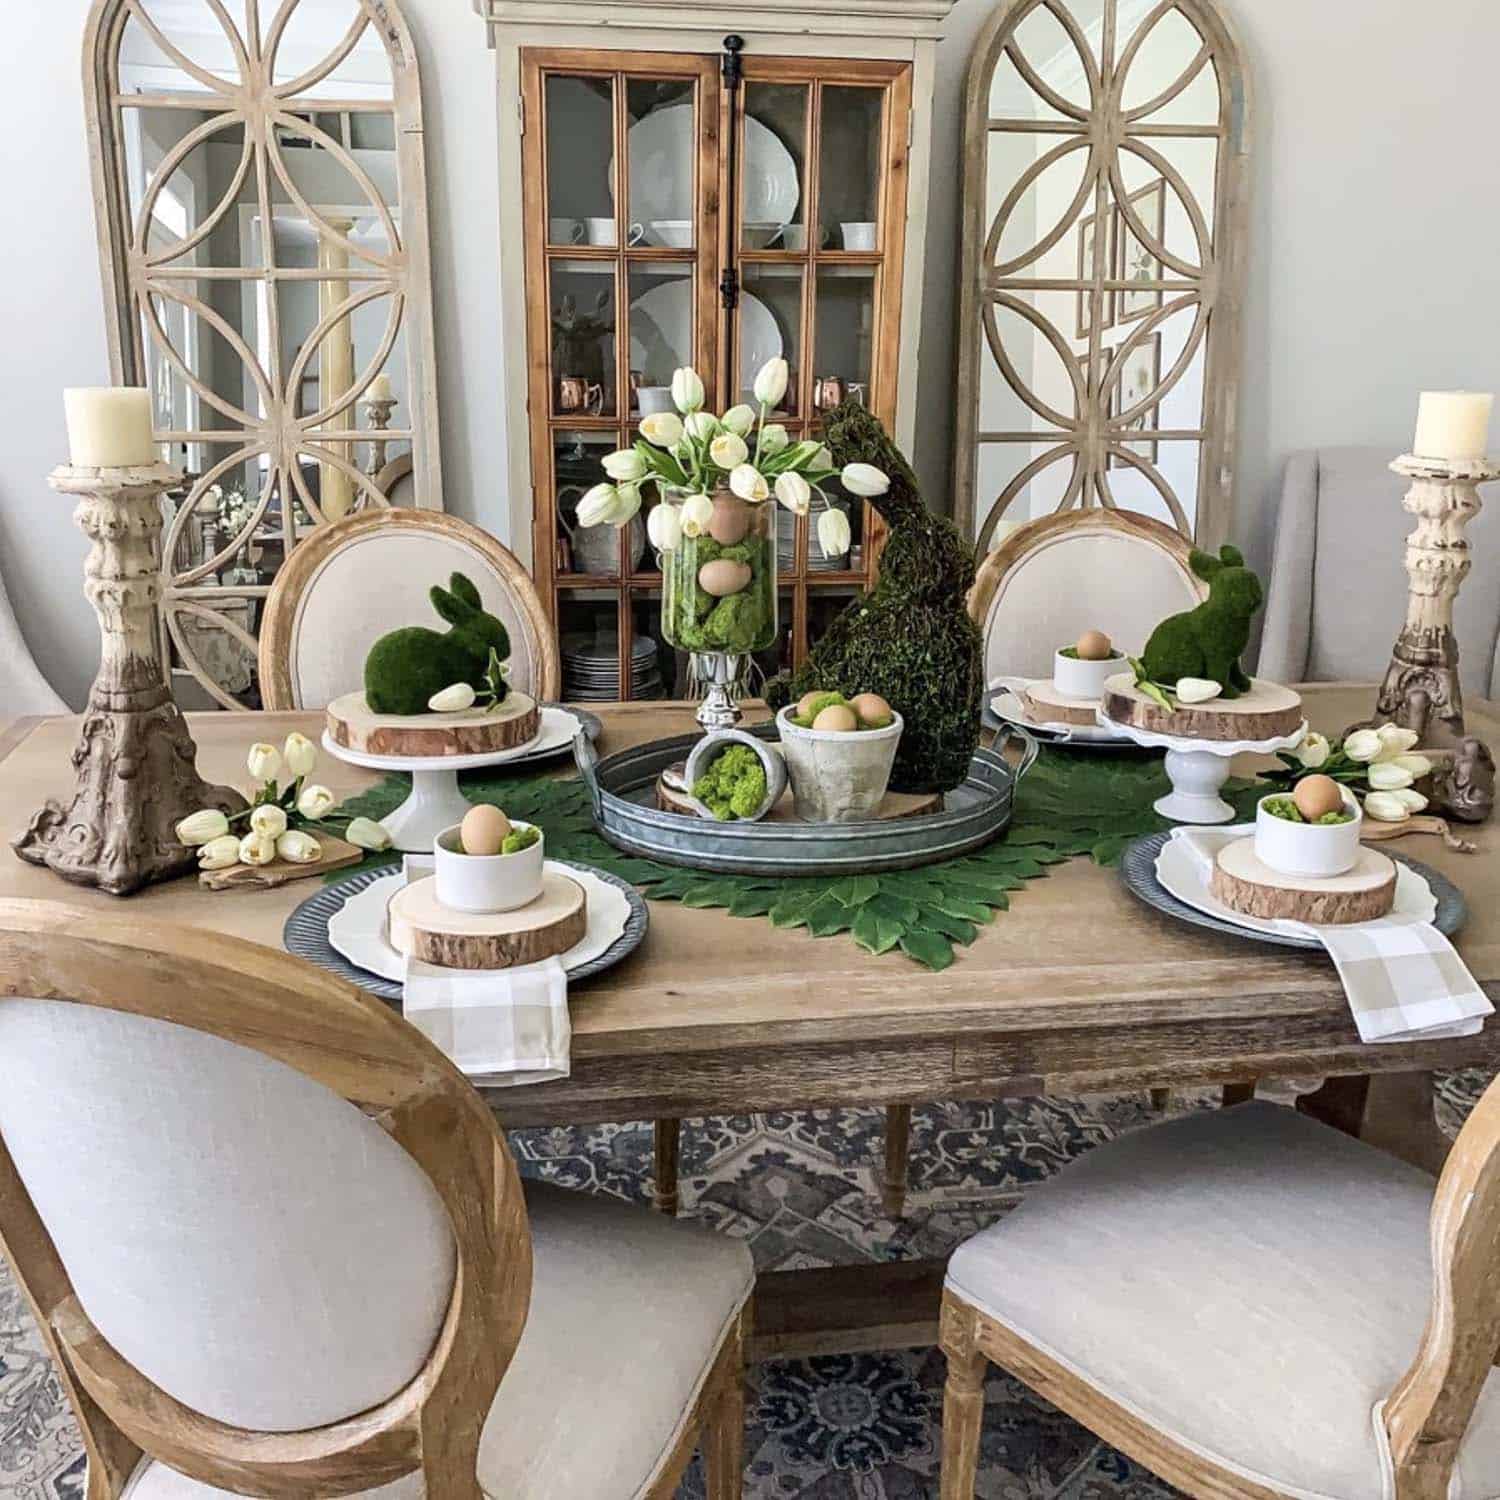 natural-spring-decor-for-easter-dining-table